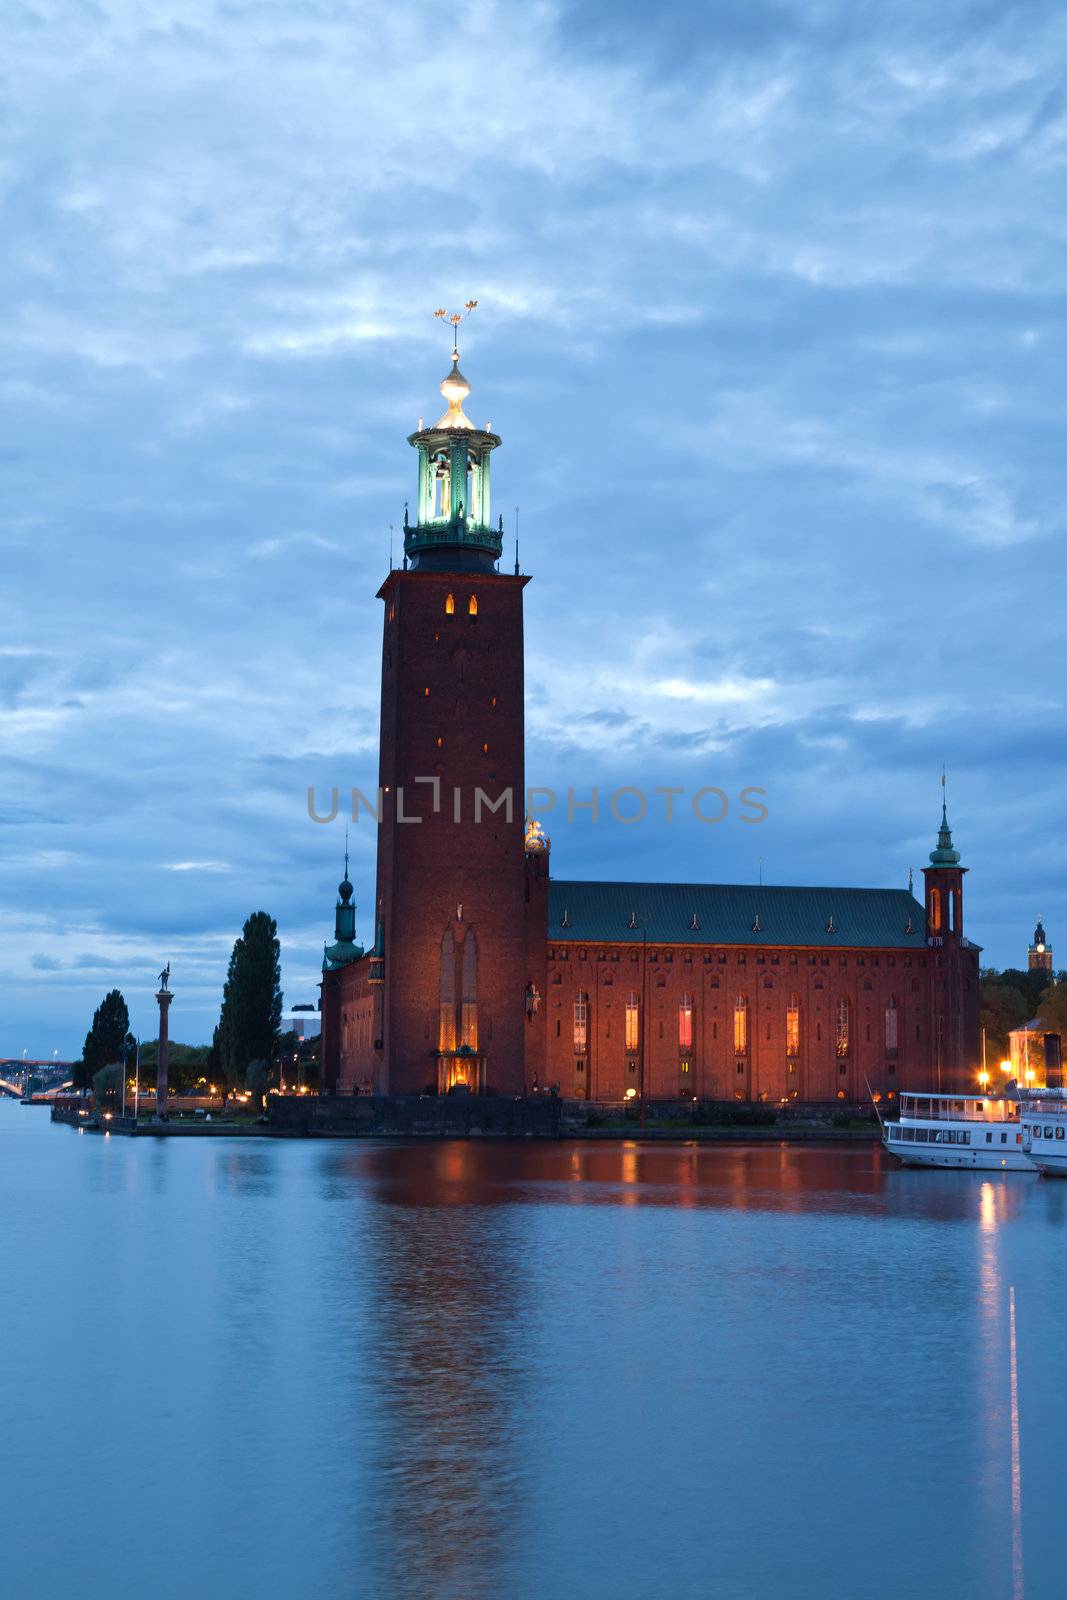 Stockholm City Hall at night by gary718